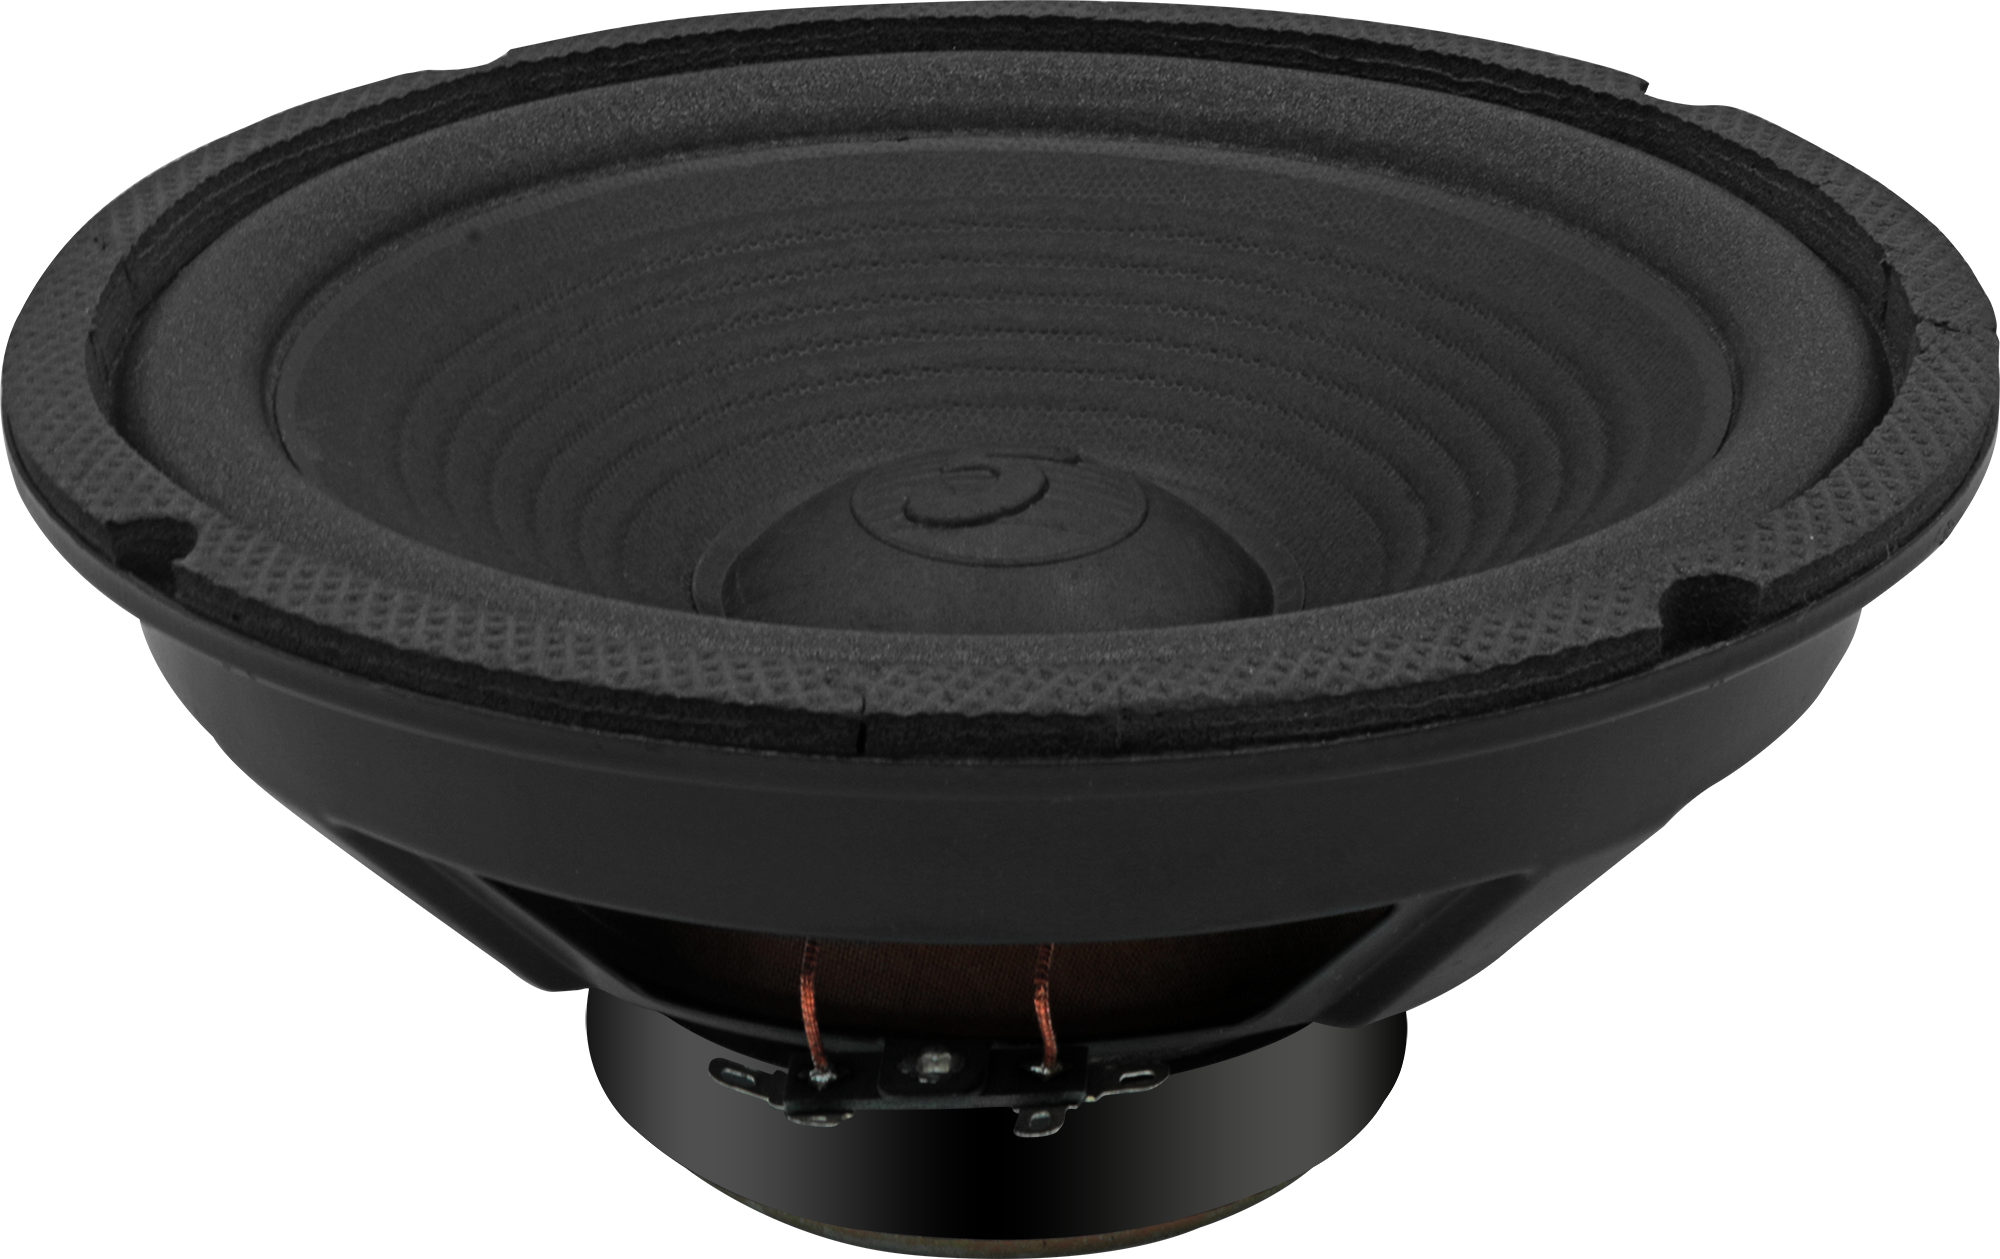 8 inch subwoofer: compact size ideal for smaller audio setups.